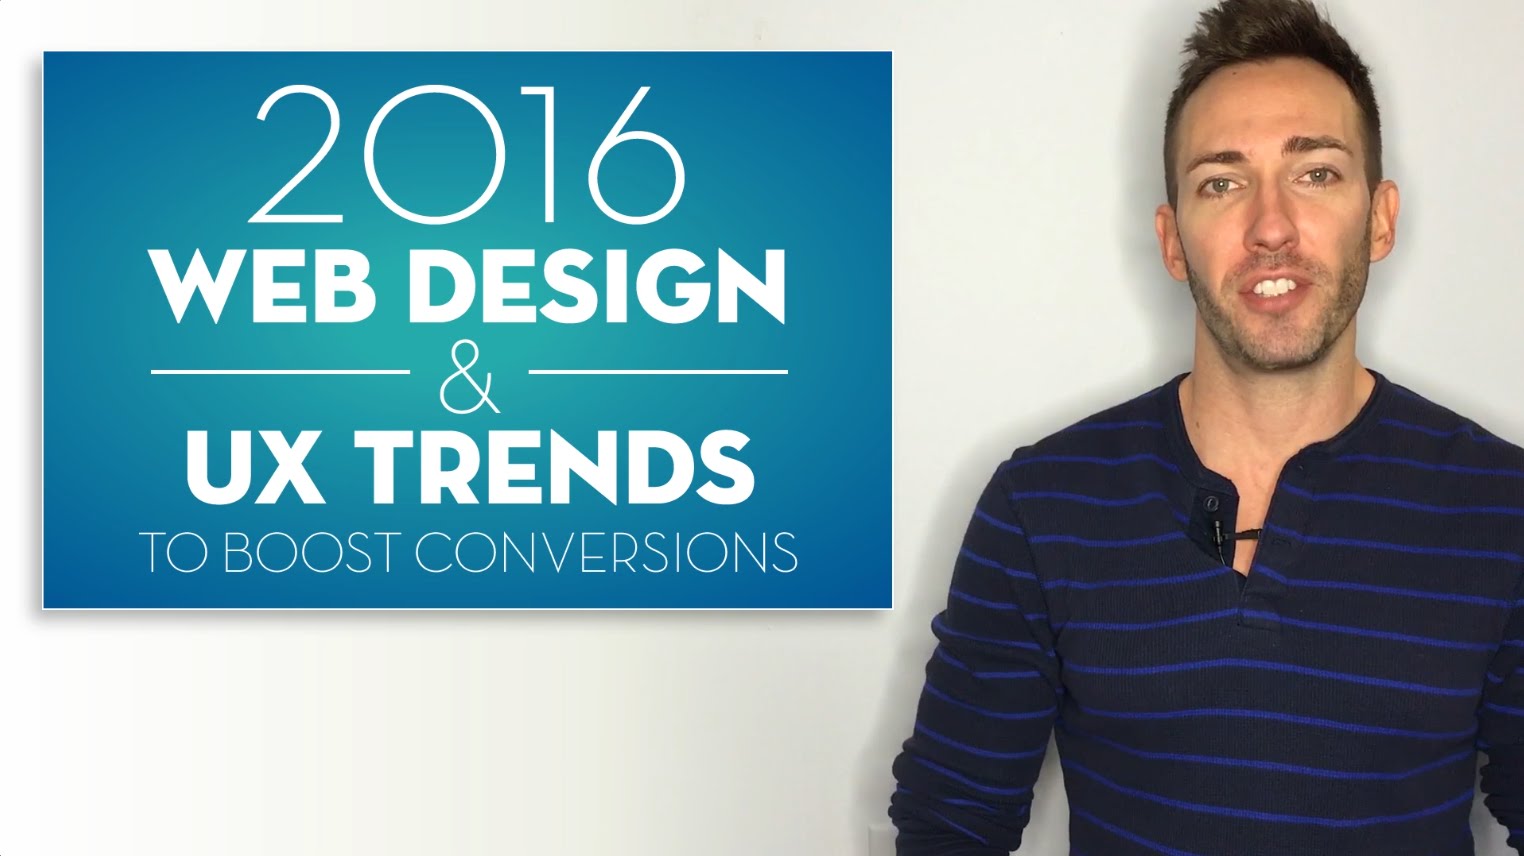 2016 Web Design Trends to Boost Conversions